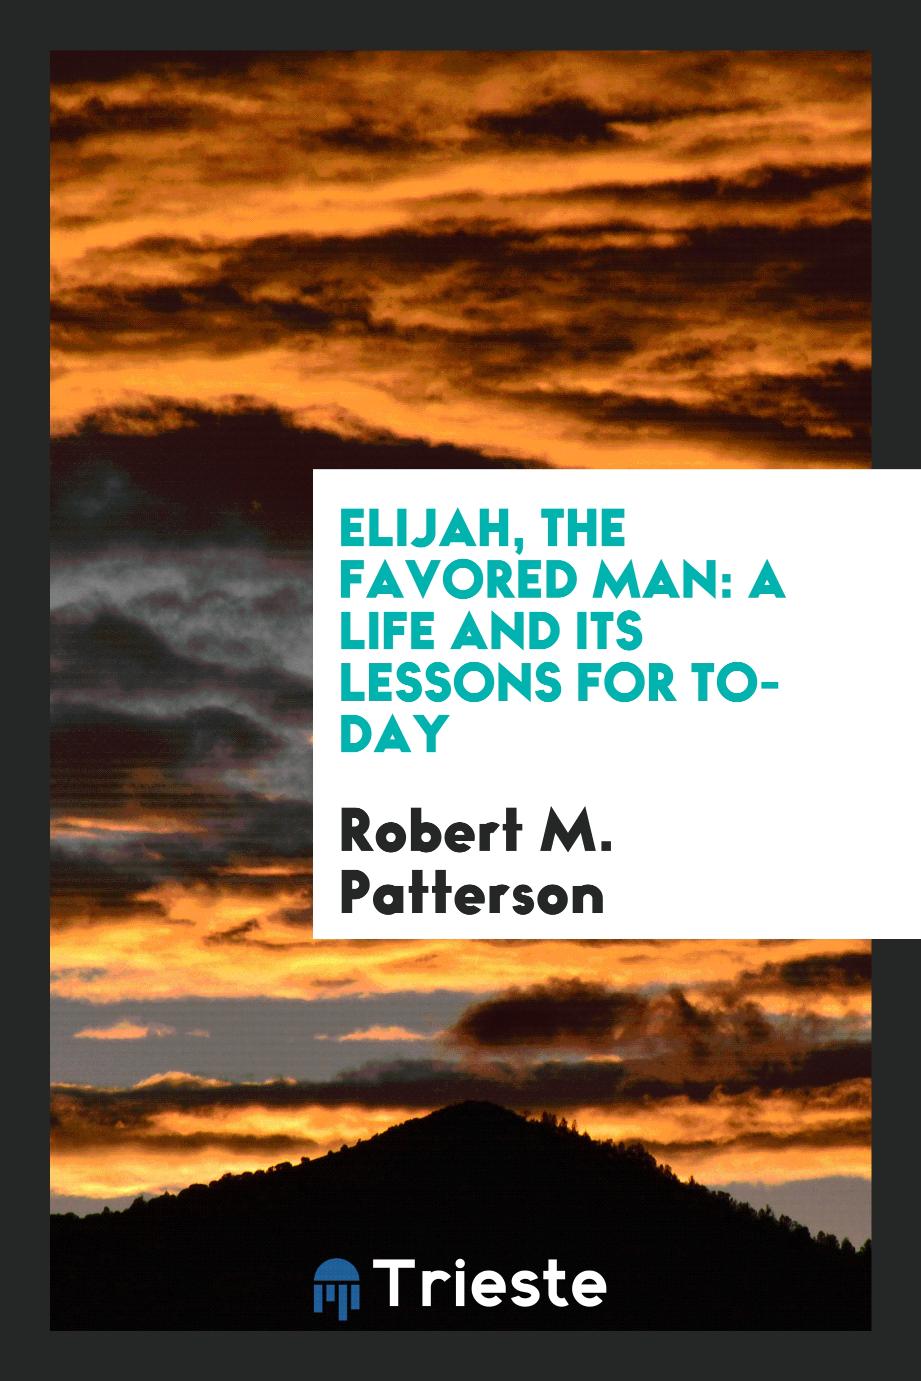 Elijah, the favored man: a life and its lessons for to-day